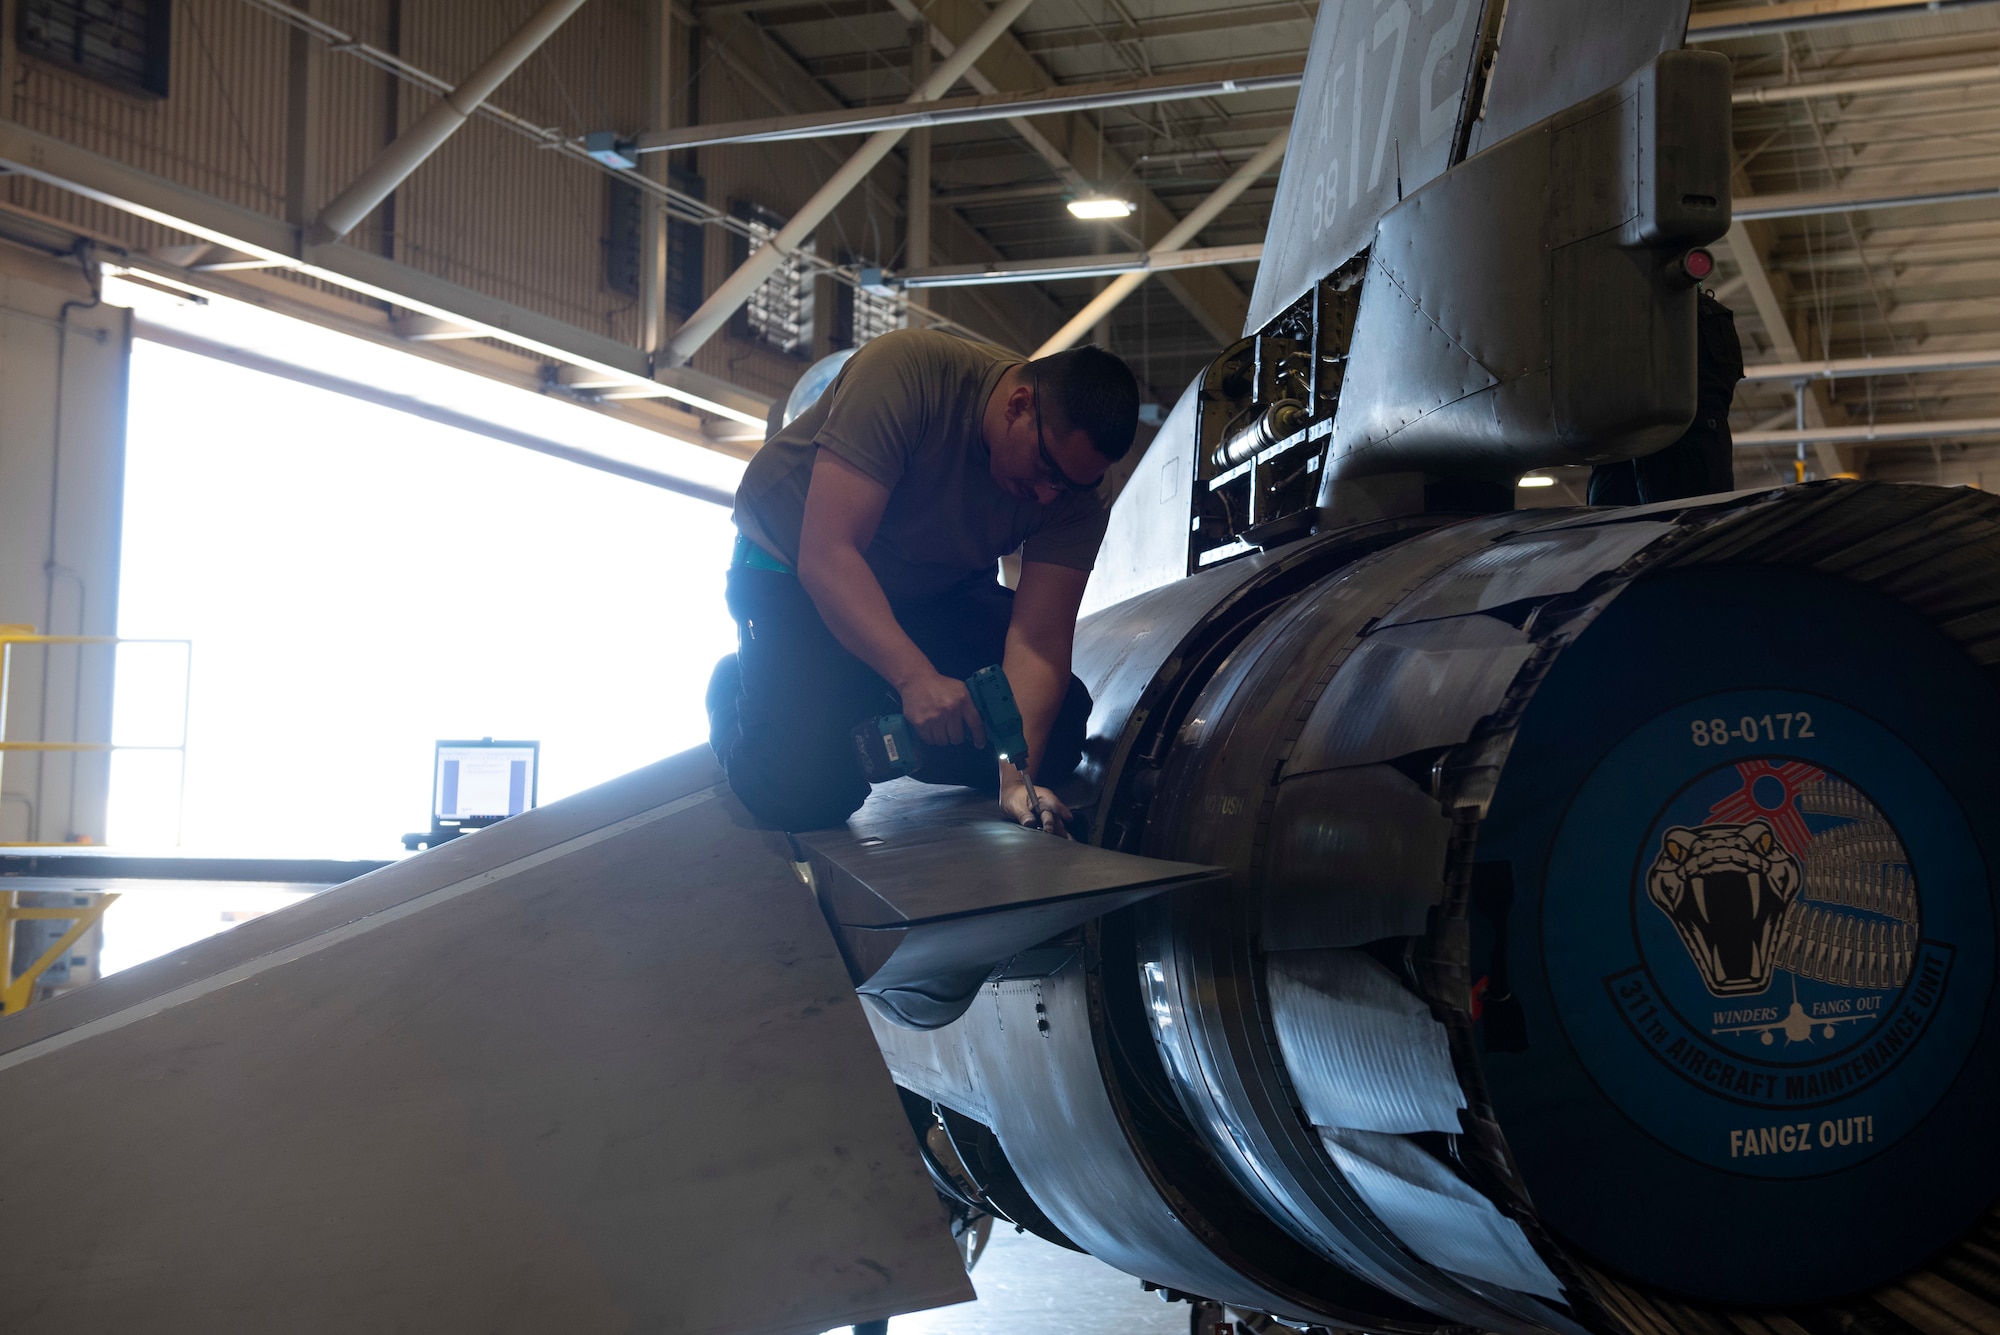 Staff Sgt. Luis Lopez-Rosales, 49th Equipment Maintenance Squadron aircraft phase inspection section journeyman, installs a panel on an F-16 Viper, May 18, 2022, on Holloman Air Force Base, New Mexico.